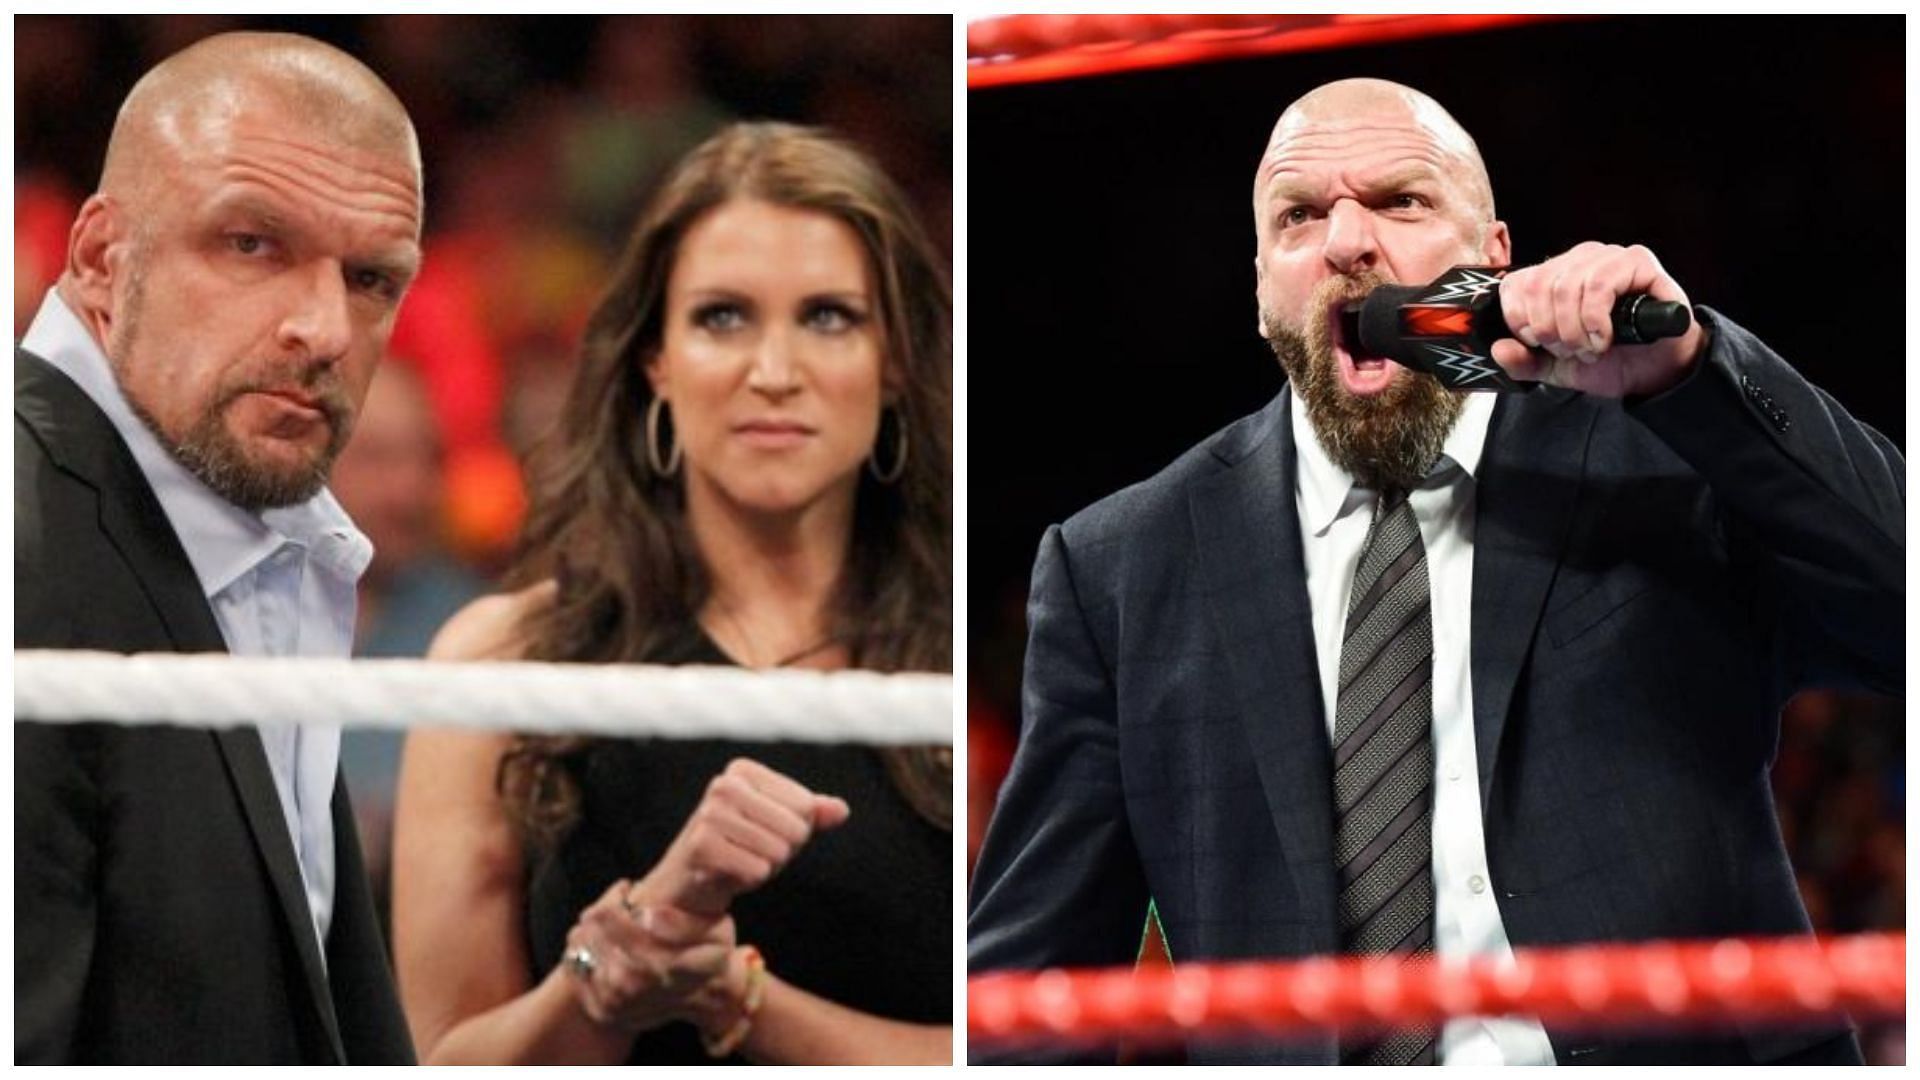 Triple H is the WWE Chief Content Officer and Stephanie McMahon is a Co-CEO.